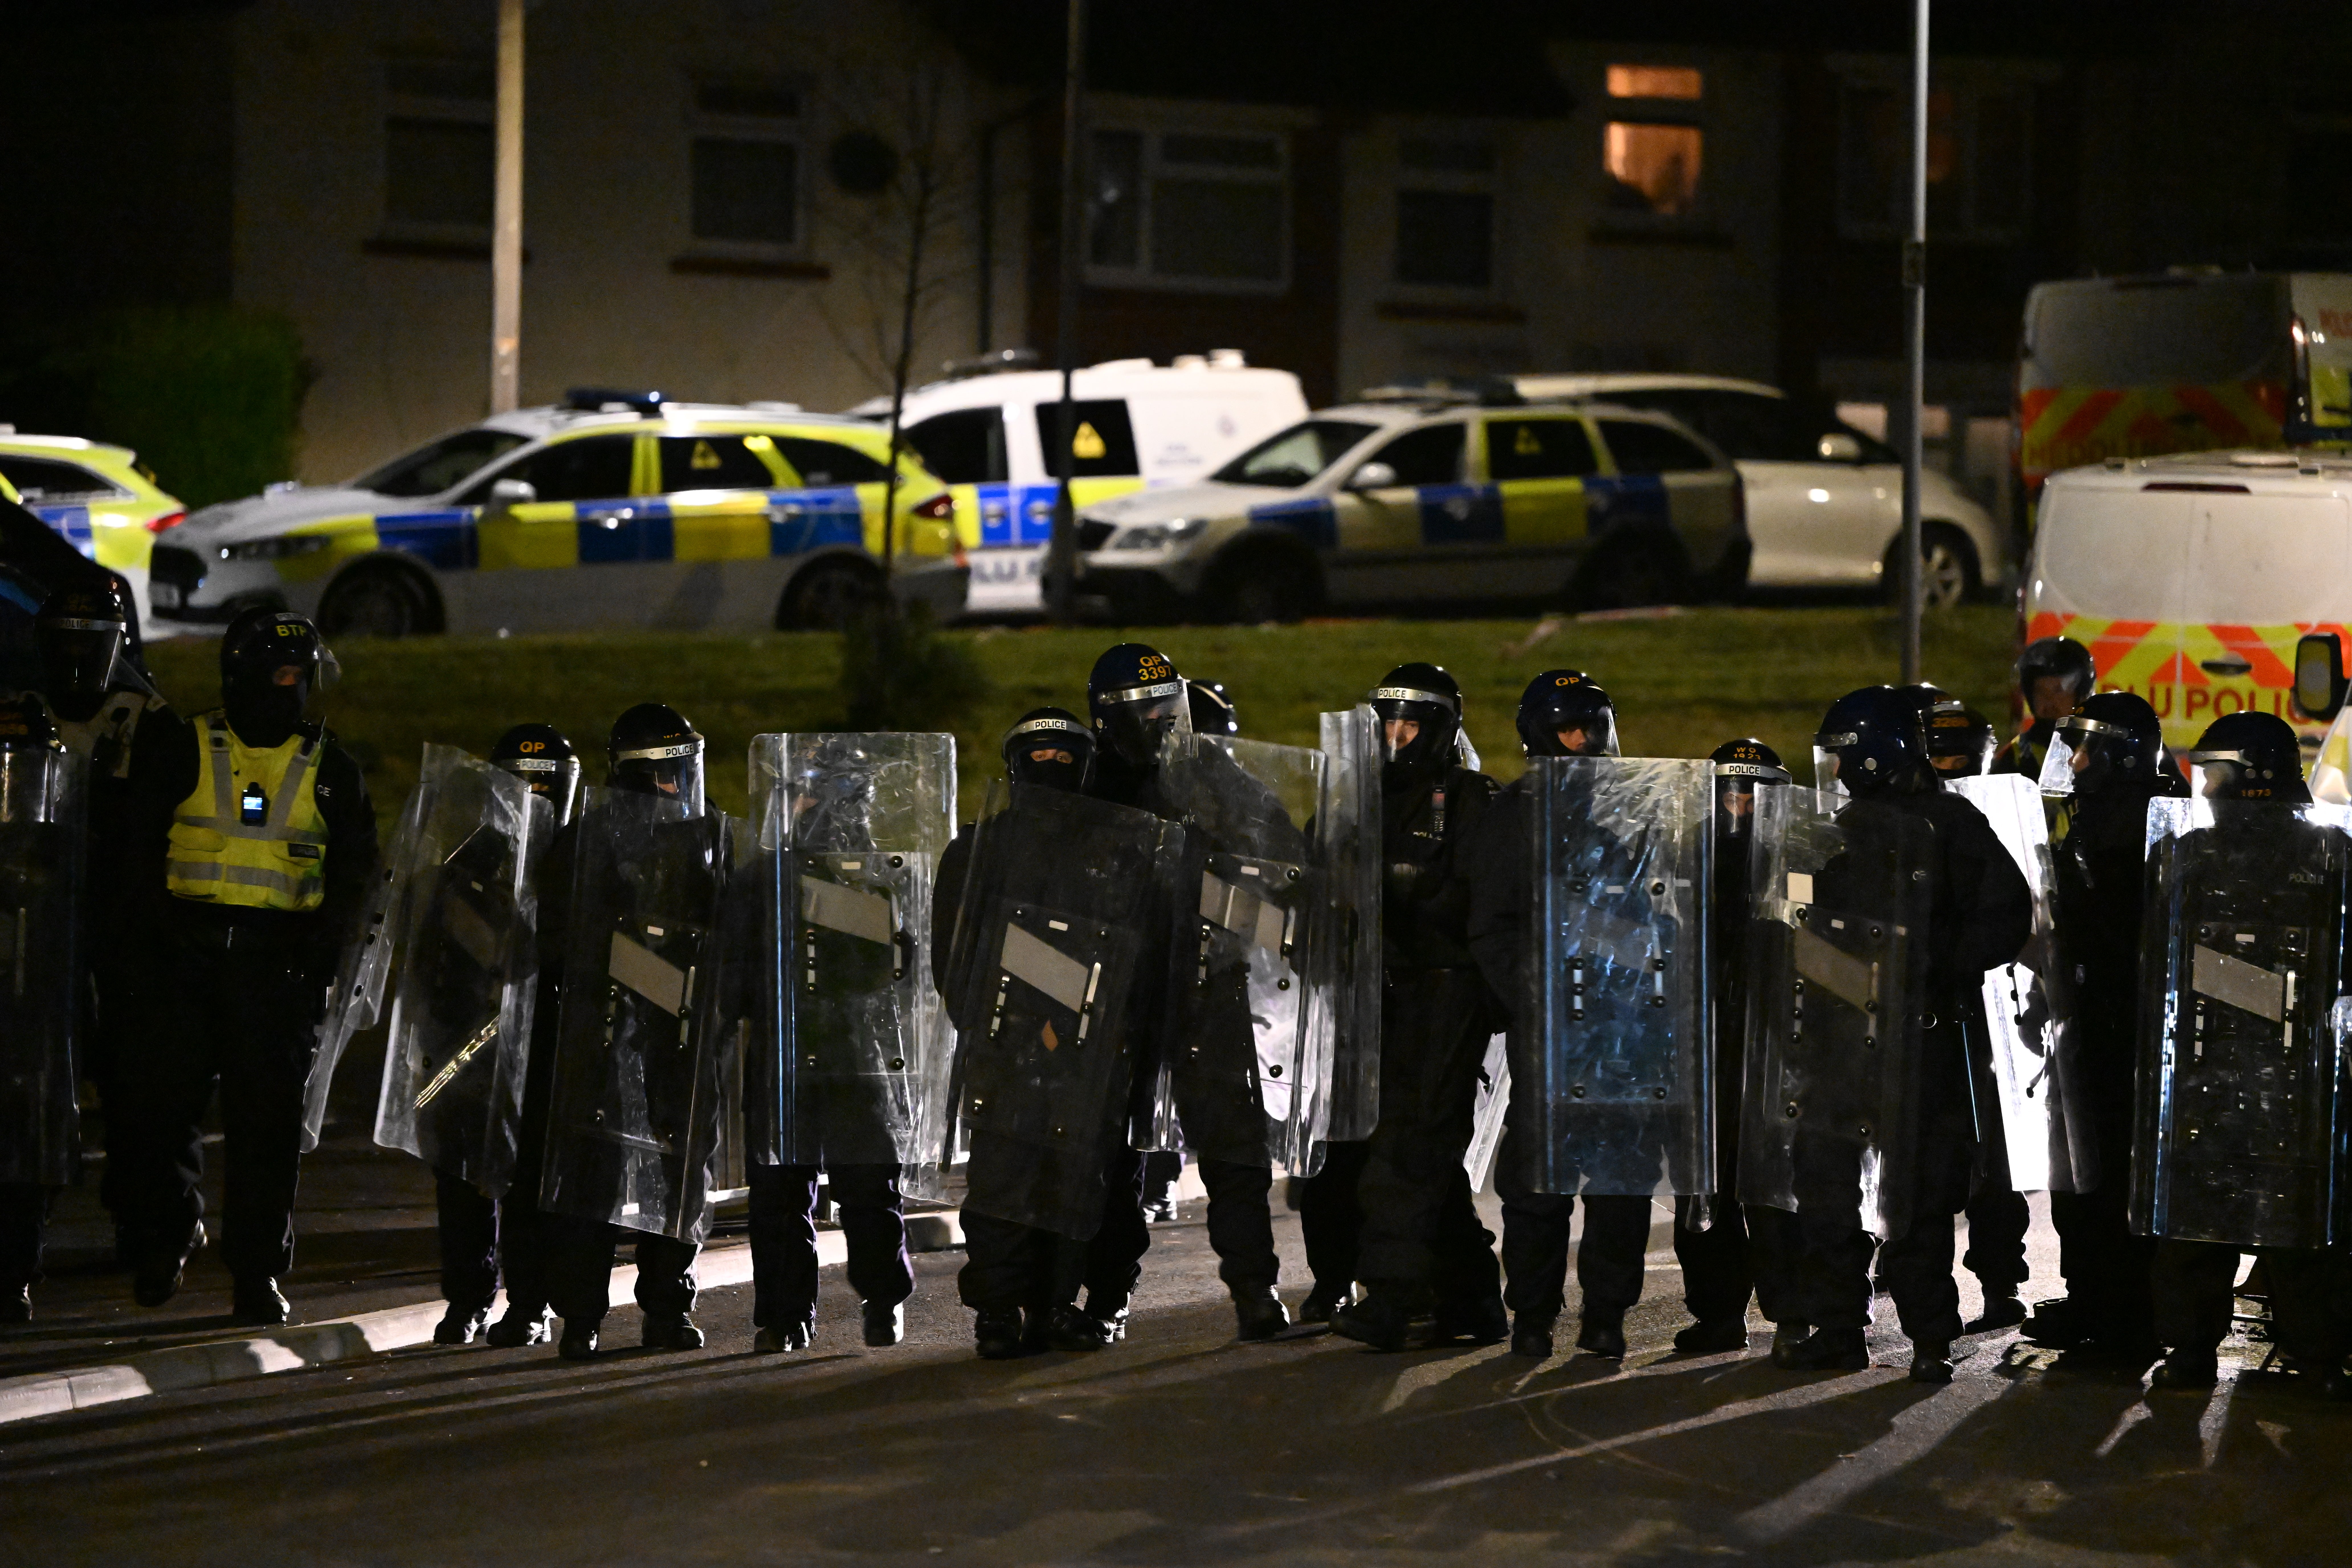 Riot police at the scene on Monday night